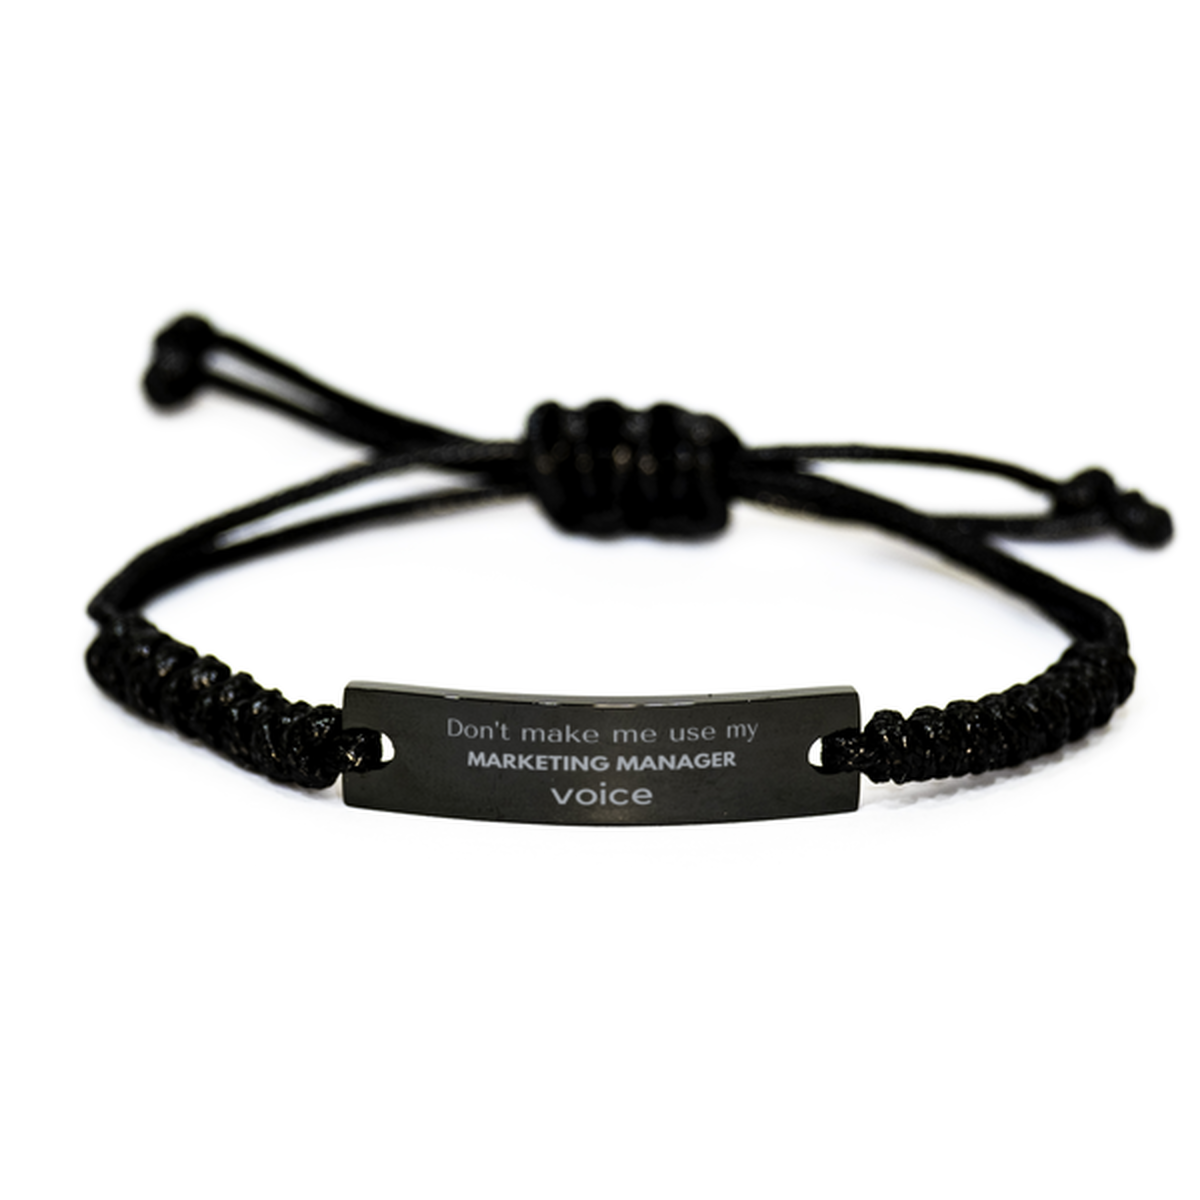 Don't make me use my Marketing Manager voice, Sarcasm Marketing Manager Gifts, Christmas Marketing Manager Black Rope Bracelet Birthday Unique Gifts For Marketing Manager Coworkers, Men, Women, Colleague, Friends